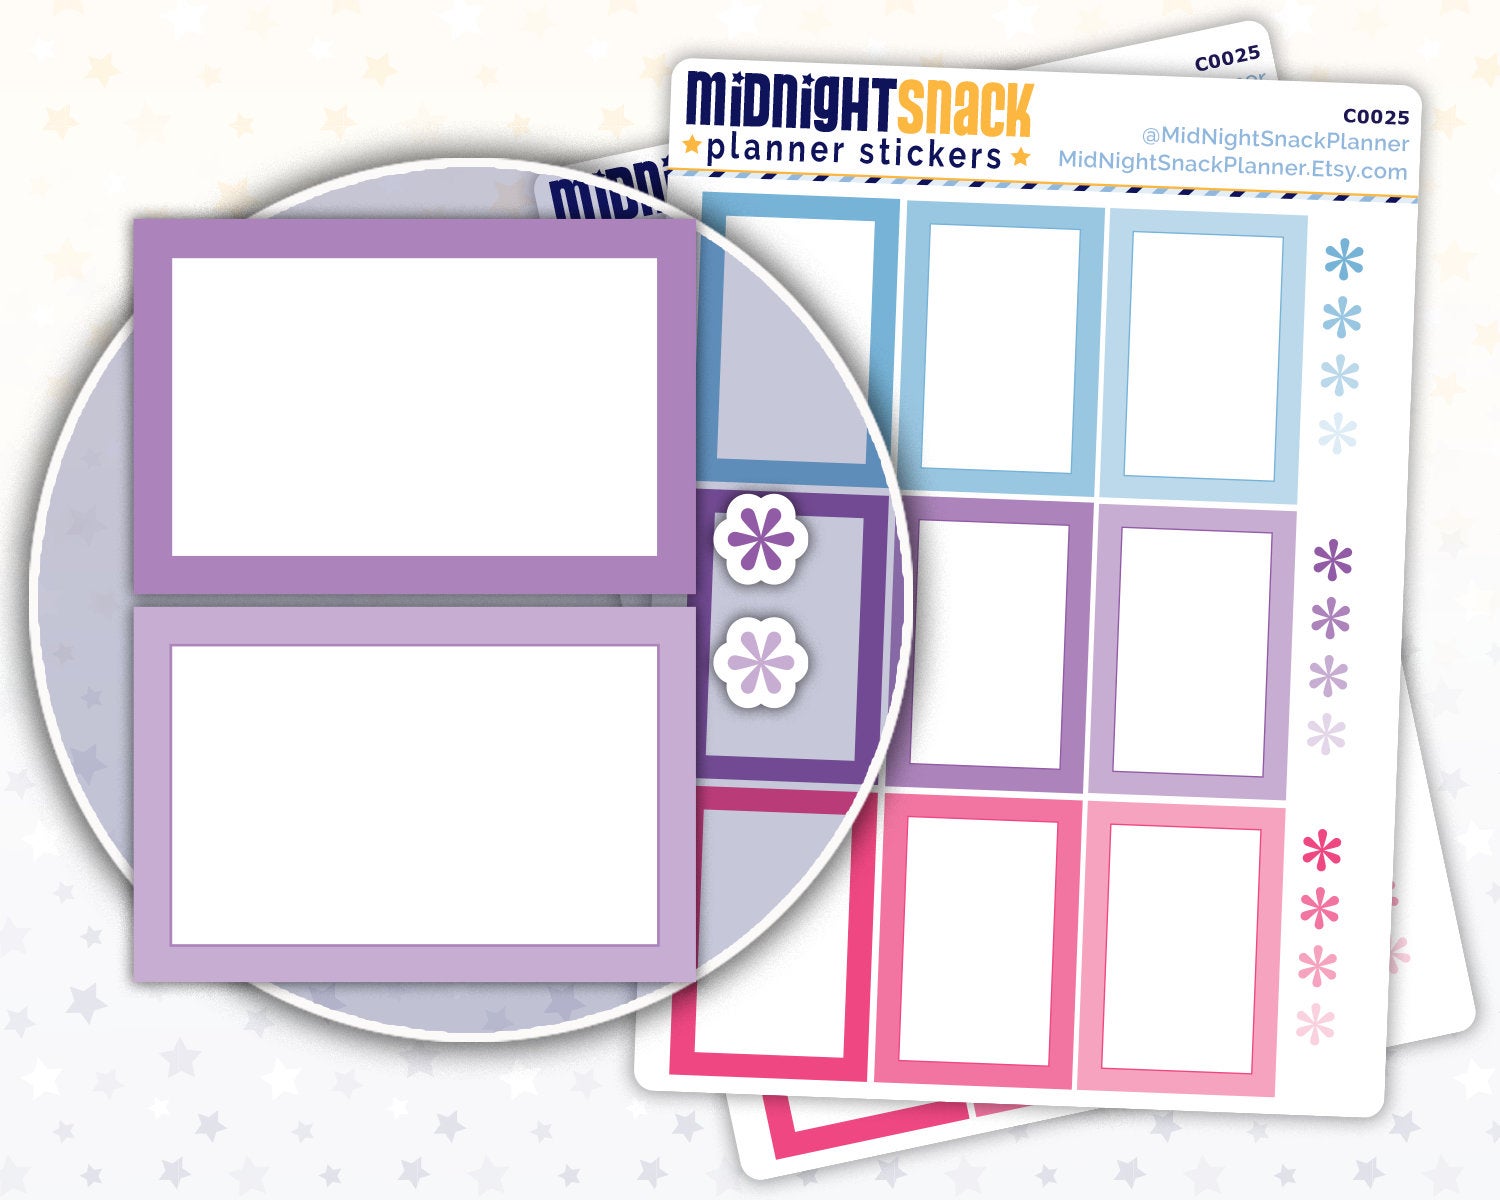 Multi-Colored Half Boxes with Bonus Asterisk Planner Stickers Midnight Snack Planner